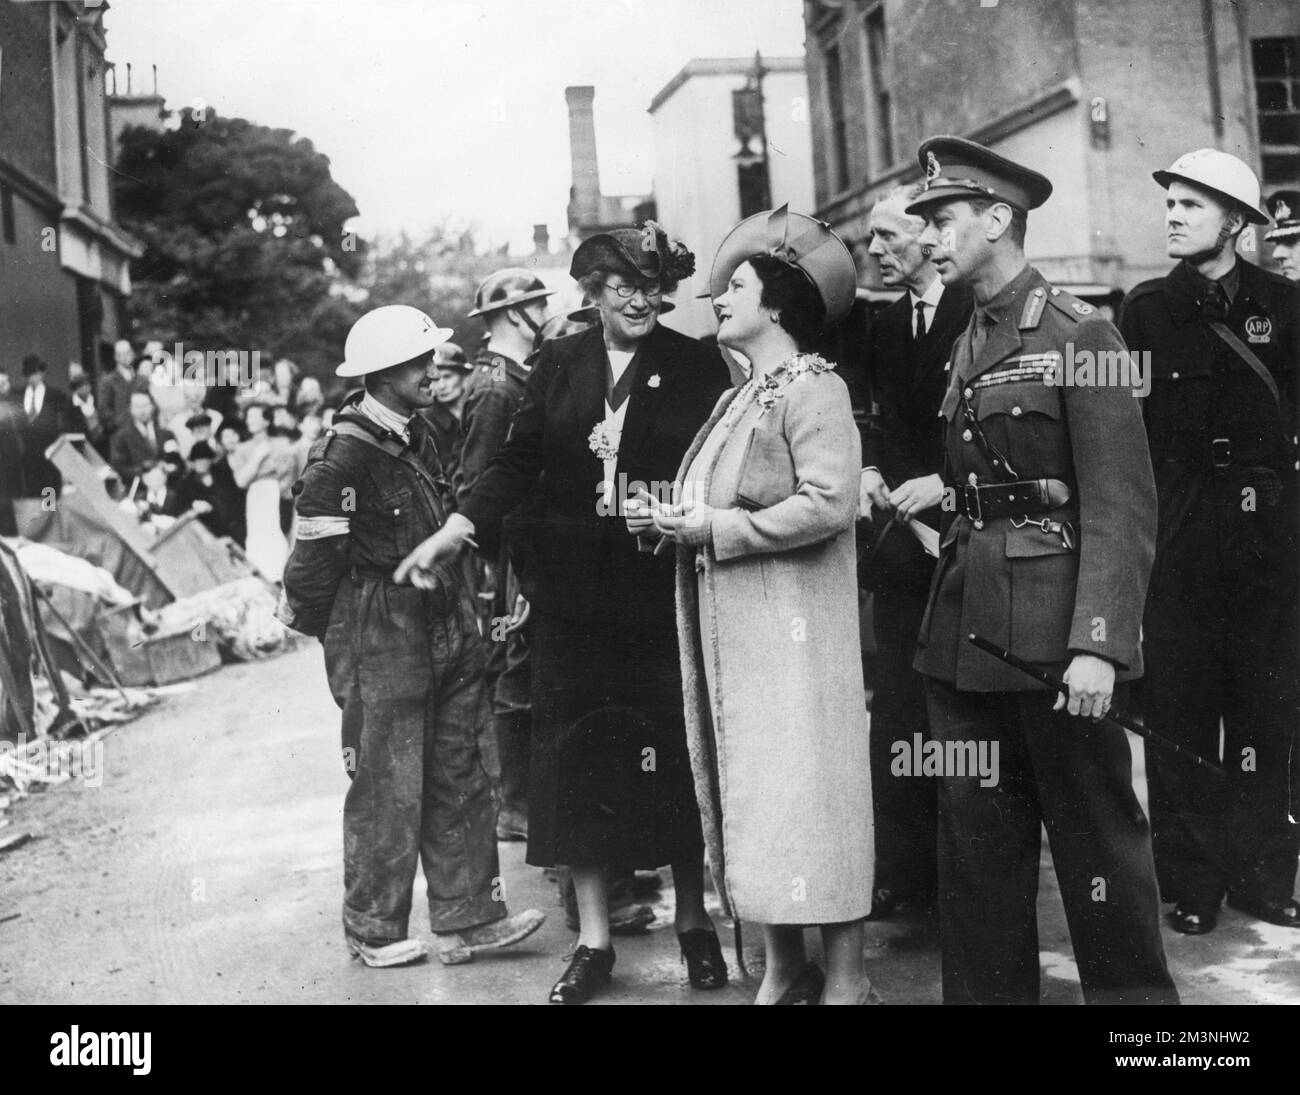 King George VI together with Queen Elizabeth chatting with Air Raid Patrol wardens and inspecting bomb damage in South West London during the Blitz, 1940.     Date: 1940 Stock Photo